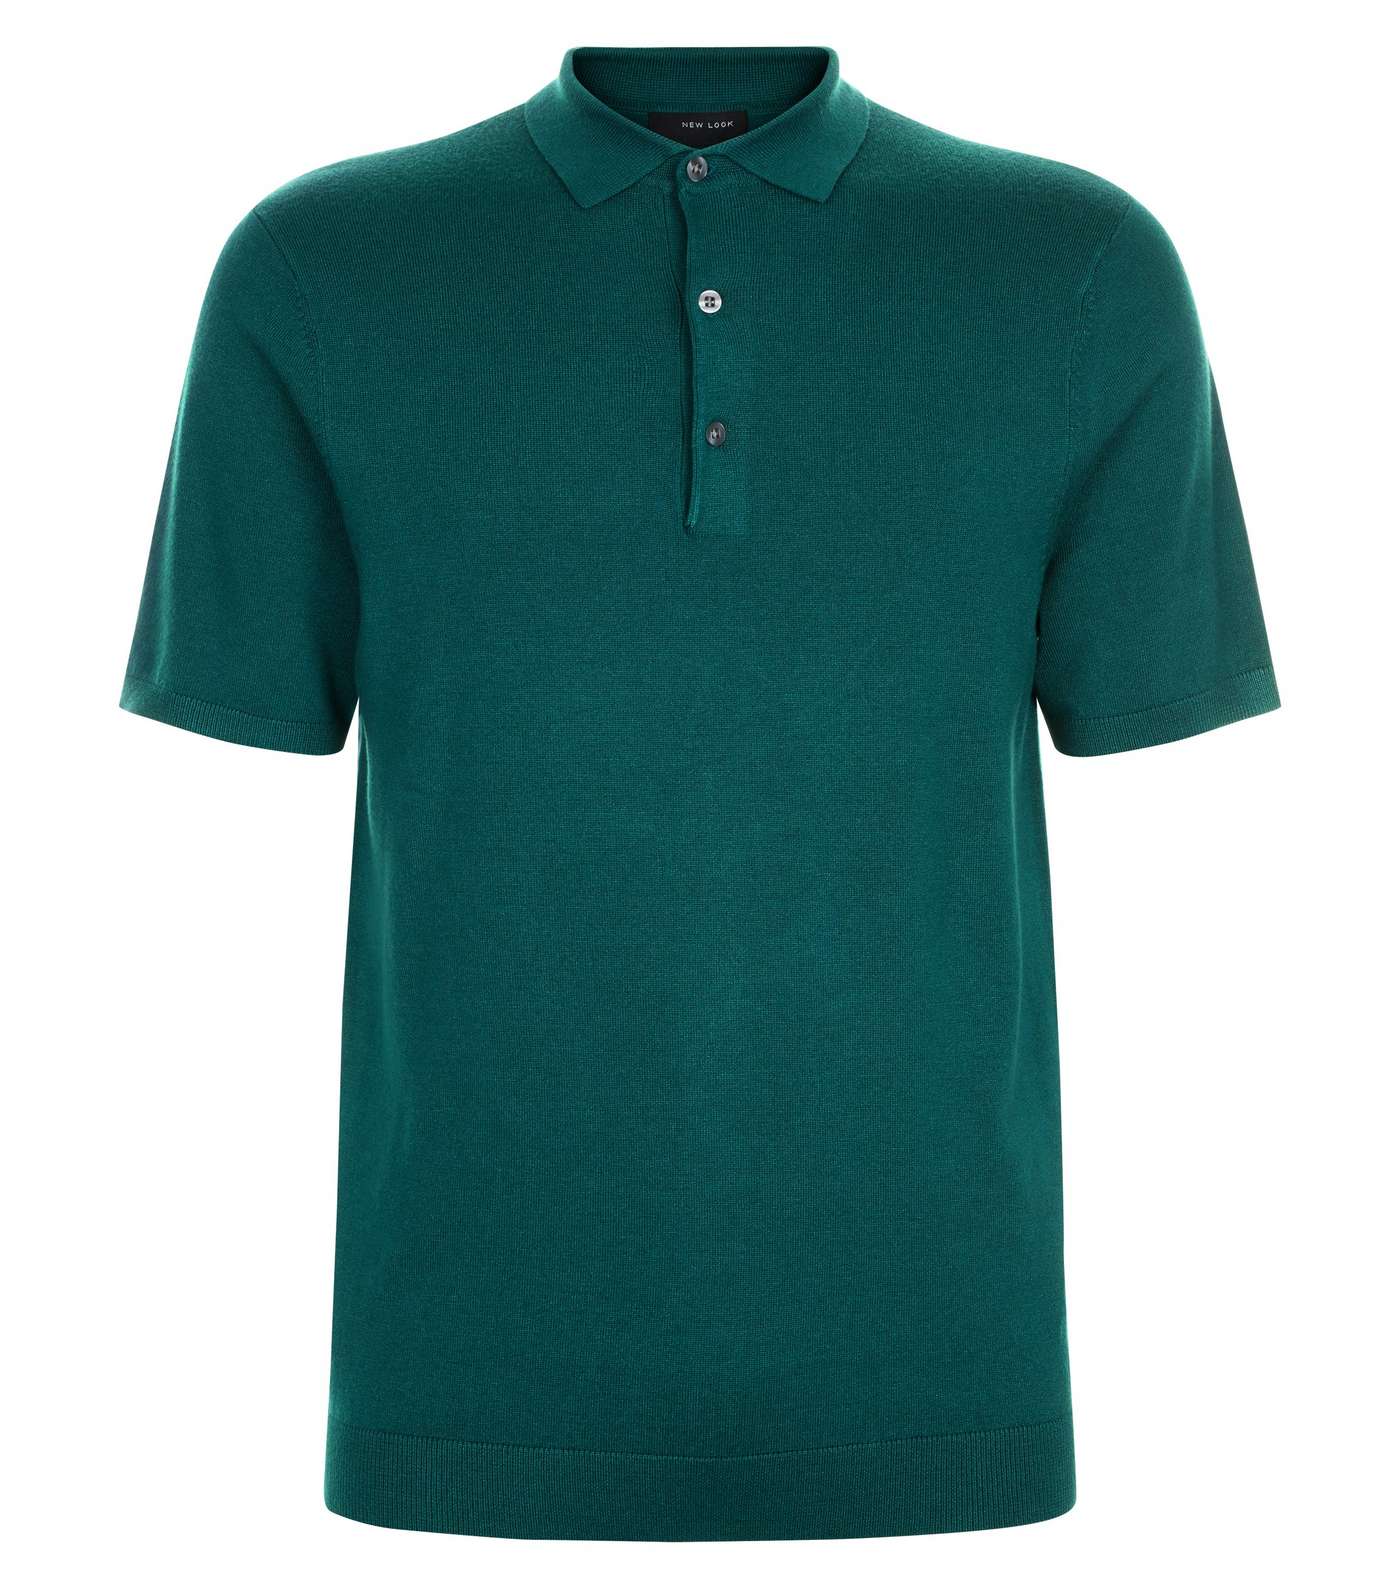 Teal Knit Muscle Fit Polo Shirt Image 4